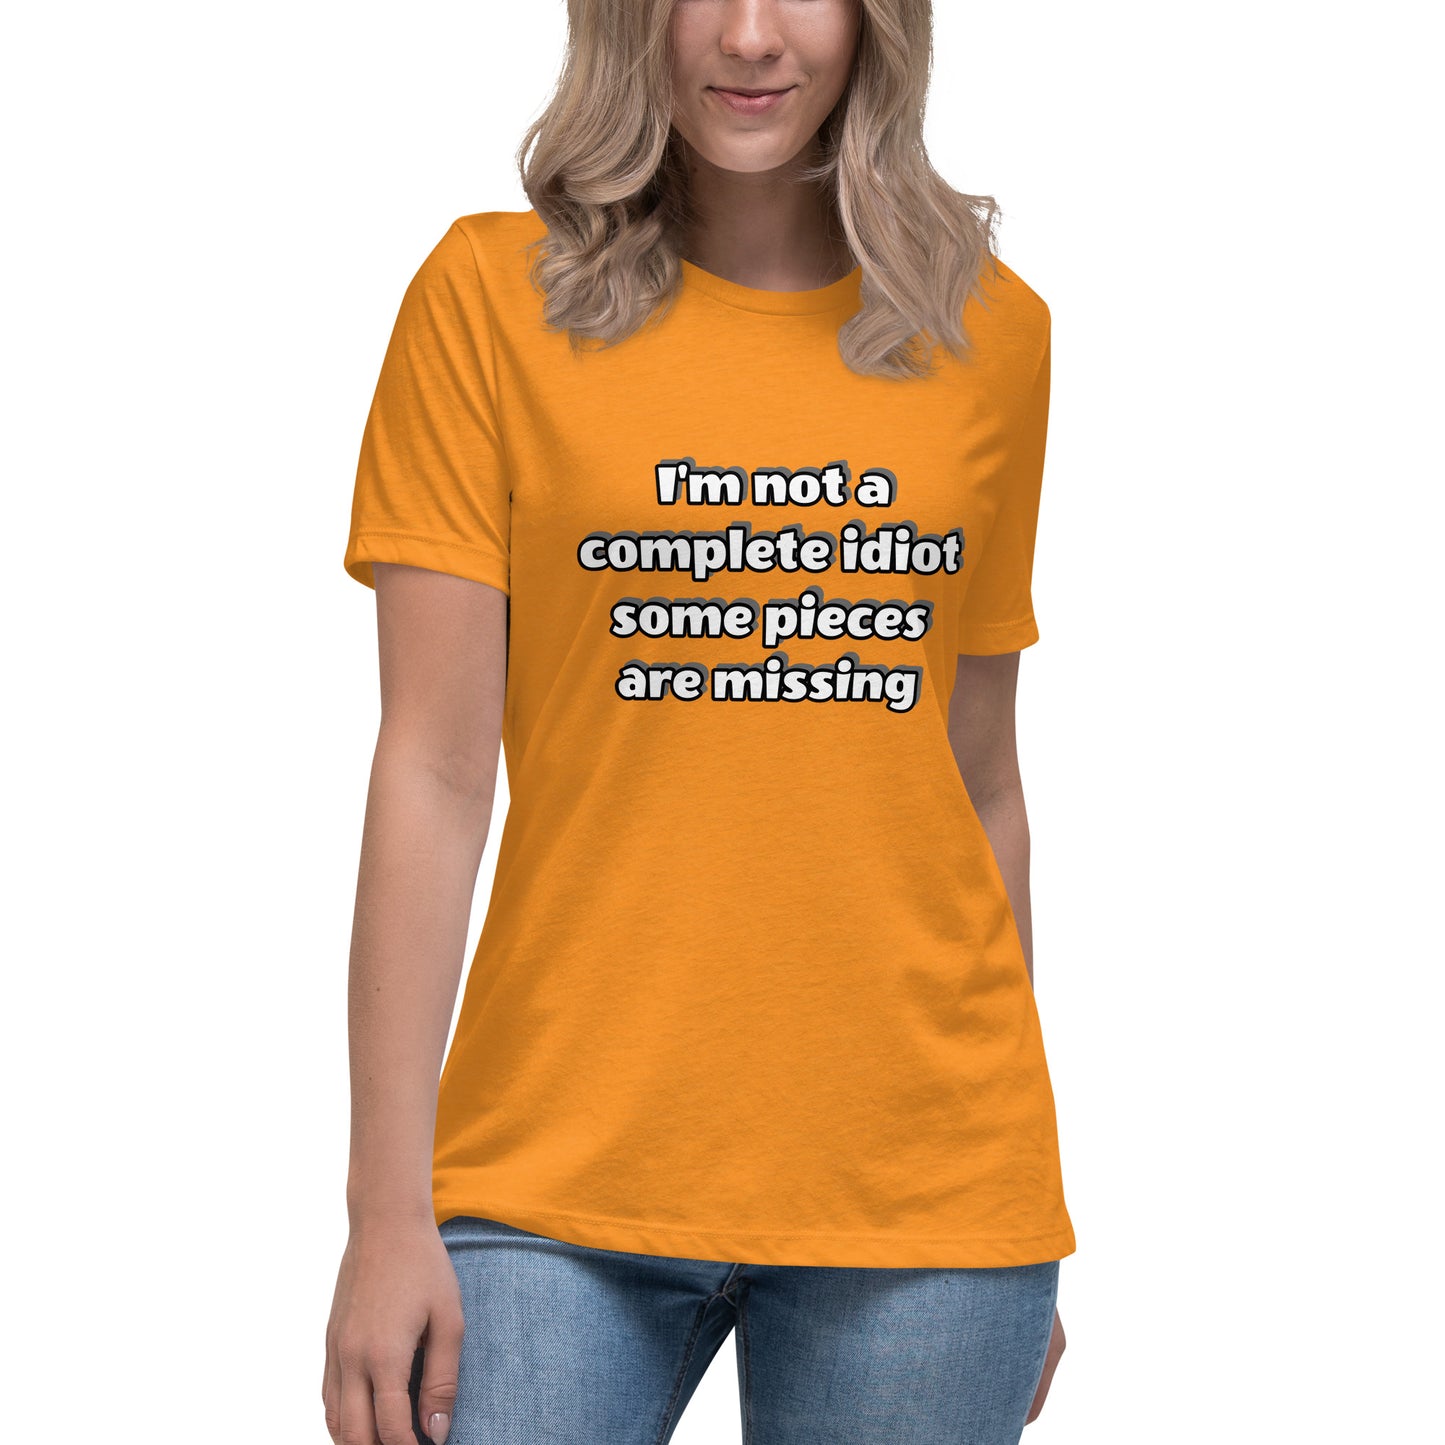 Women with marmalade t-shirt with text “I’m not a complete idiot, some pieces are missing”